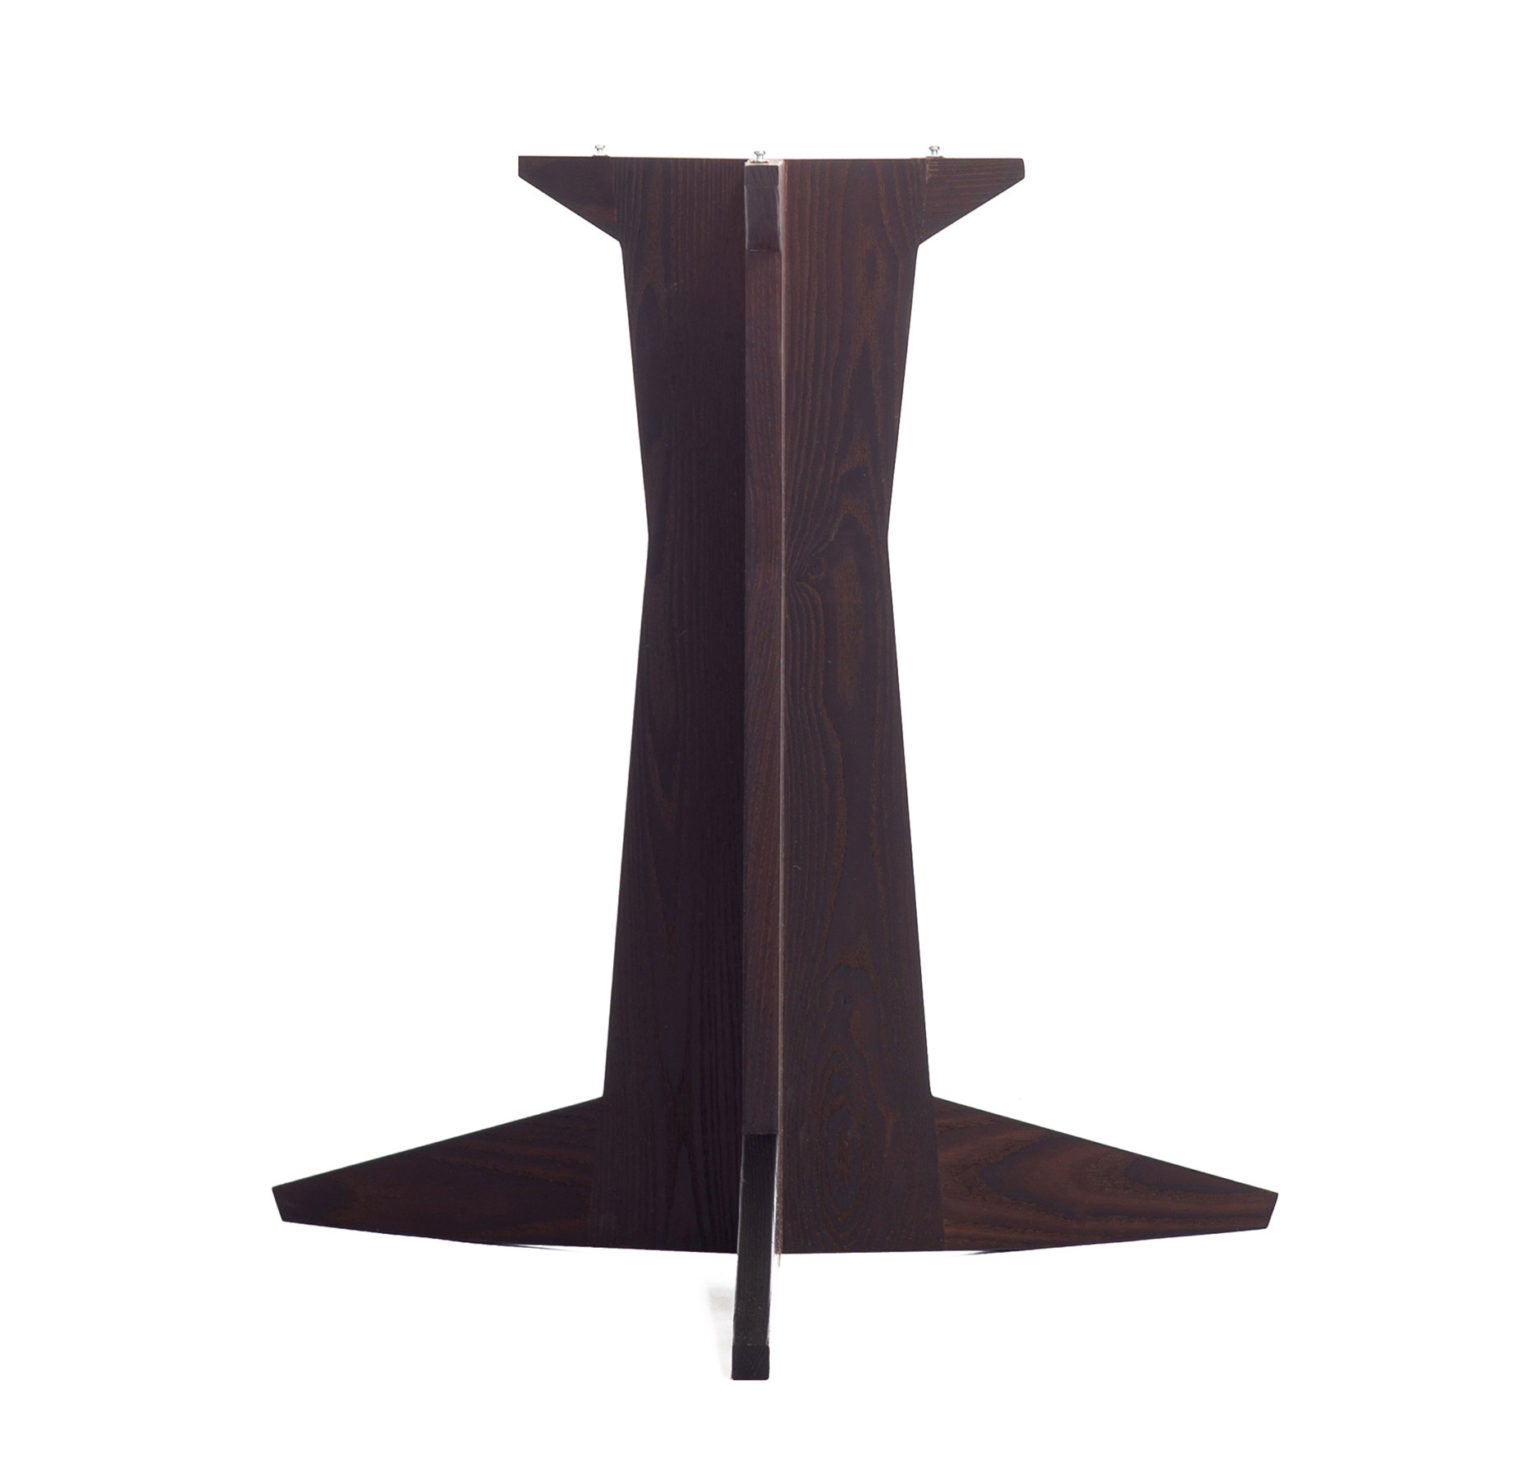 FLEETWOOD SOUND DEVILLE STANDS | VINYL SOUND Type A Light Torrefied Ash, Type A Dark Torrefied Ash, Type B Light Torrefied Ash, Type B Dark Torrefied Ash, Cast Iron Stand in Black, Cast Iron Stand in Clear